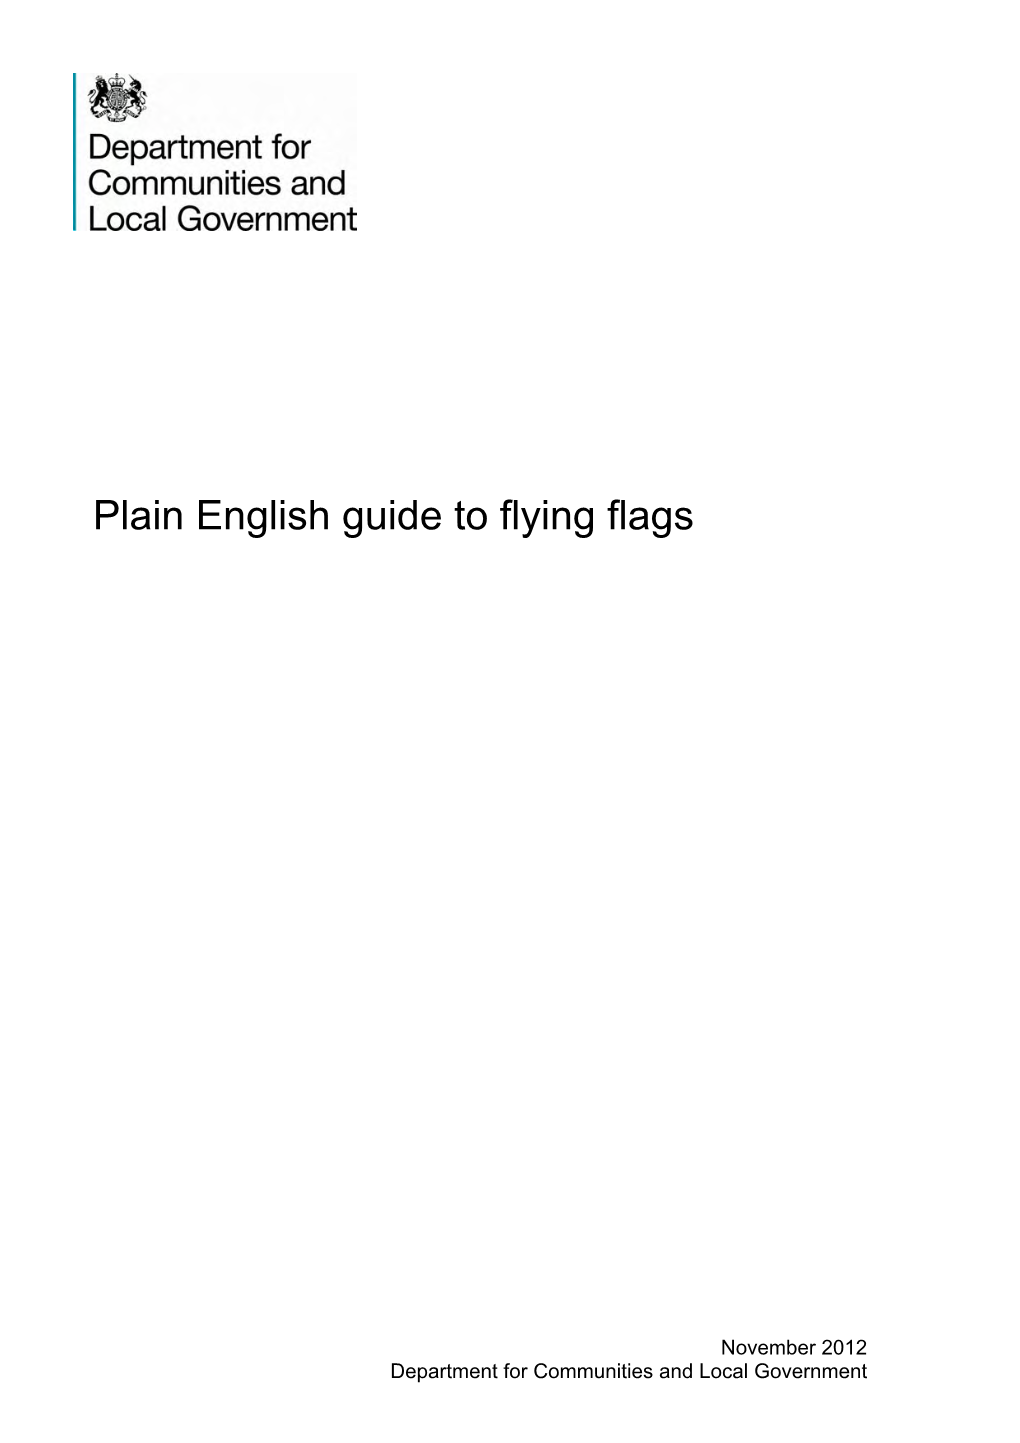 Plain English Guide to Flying Flags